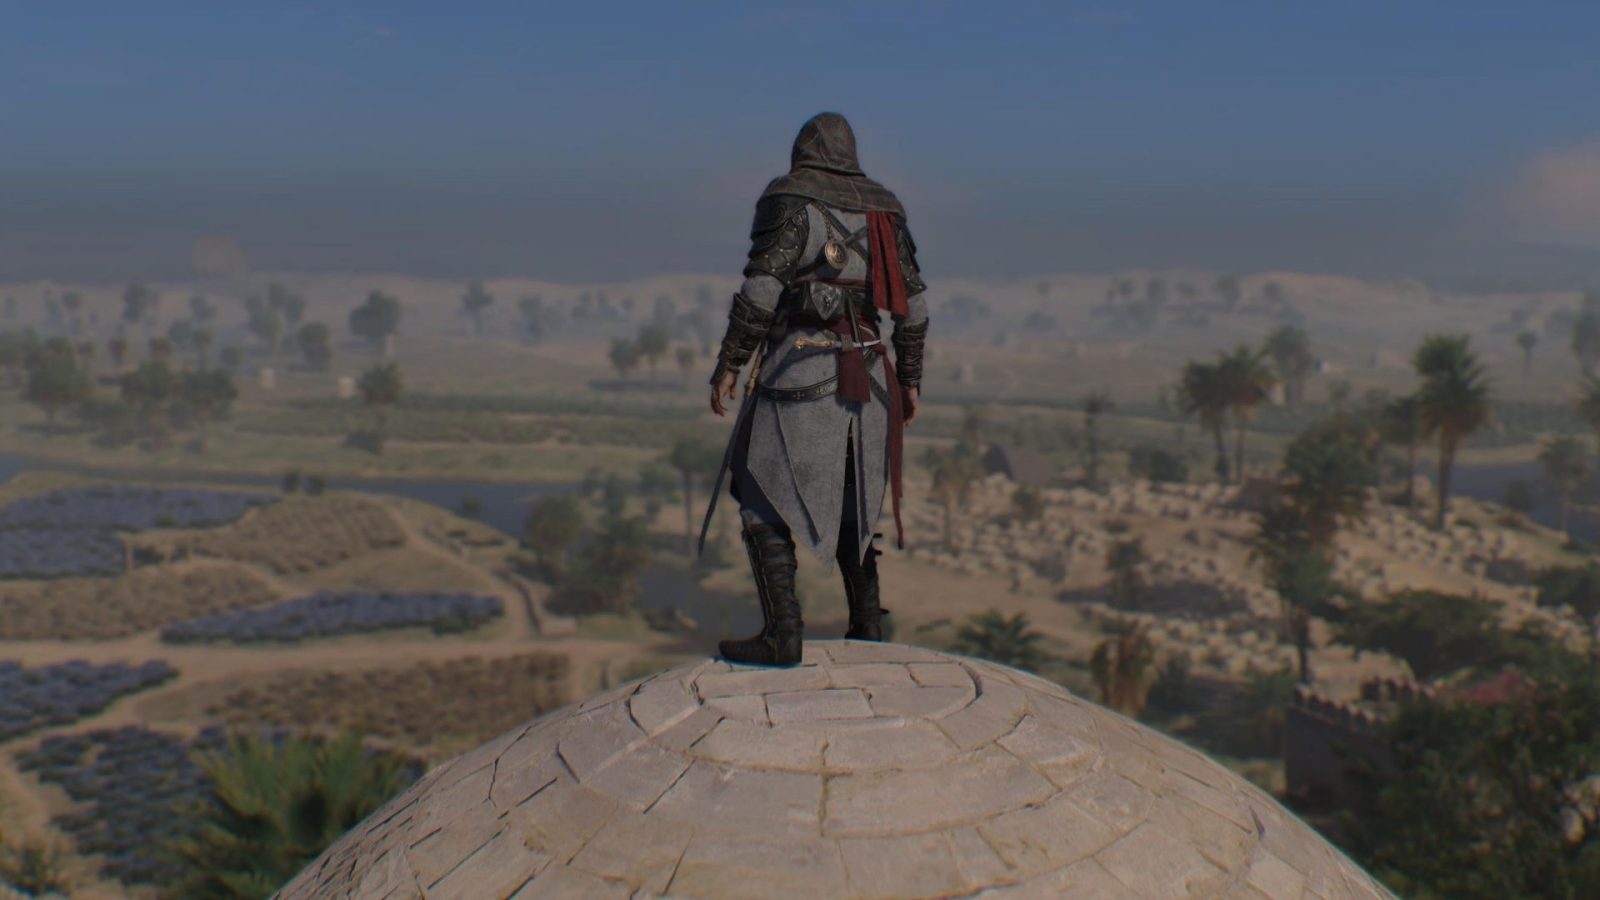 10 Assassin's Creed Origins Tips for New Players - KeenGamer